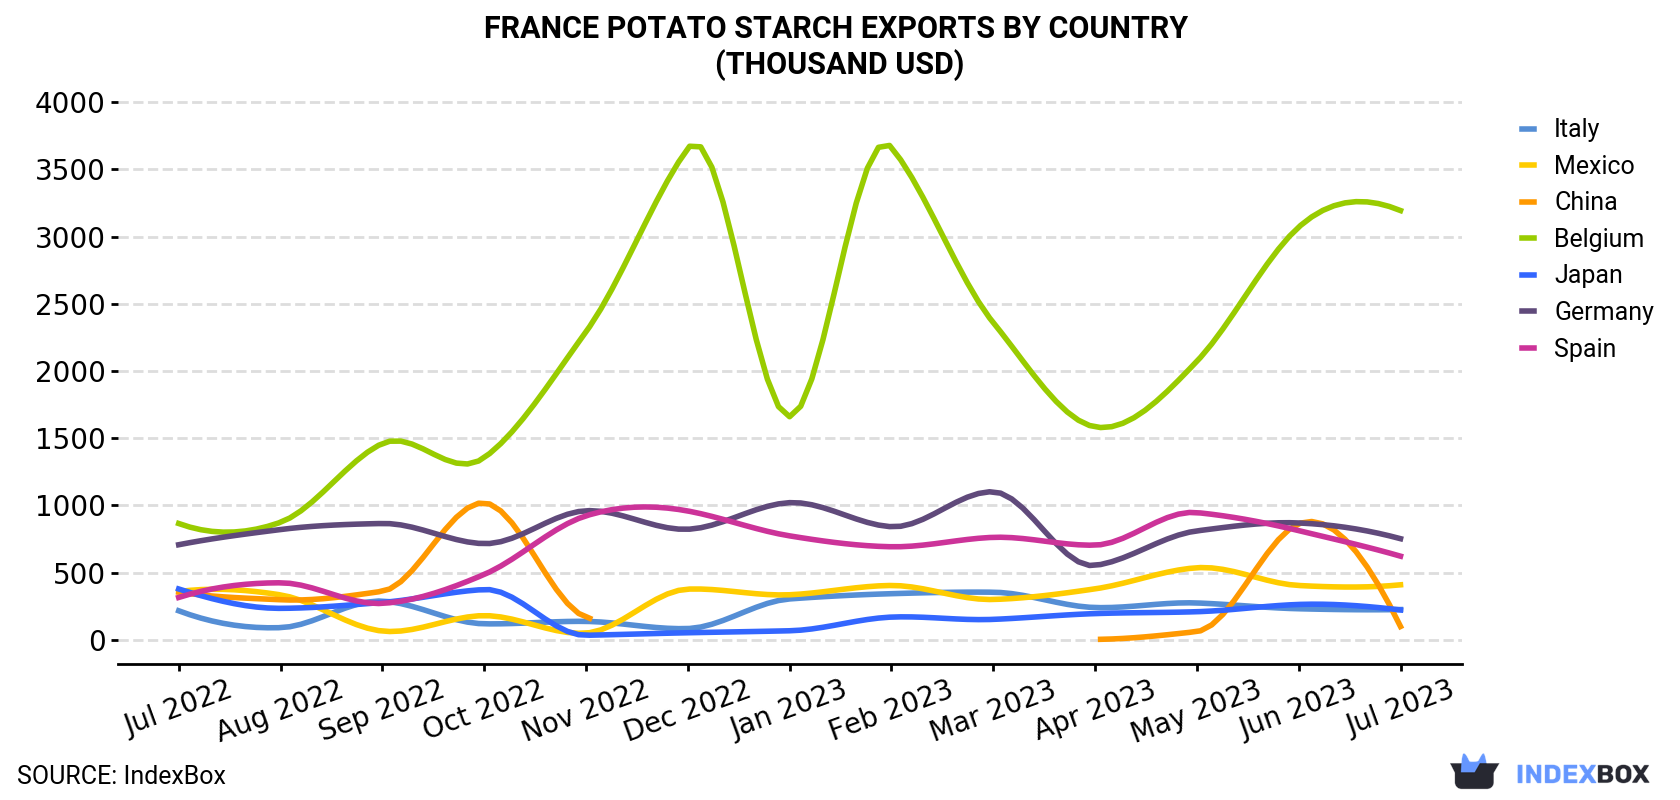 France Potato Starch Exports By Country (Thousand USD)